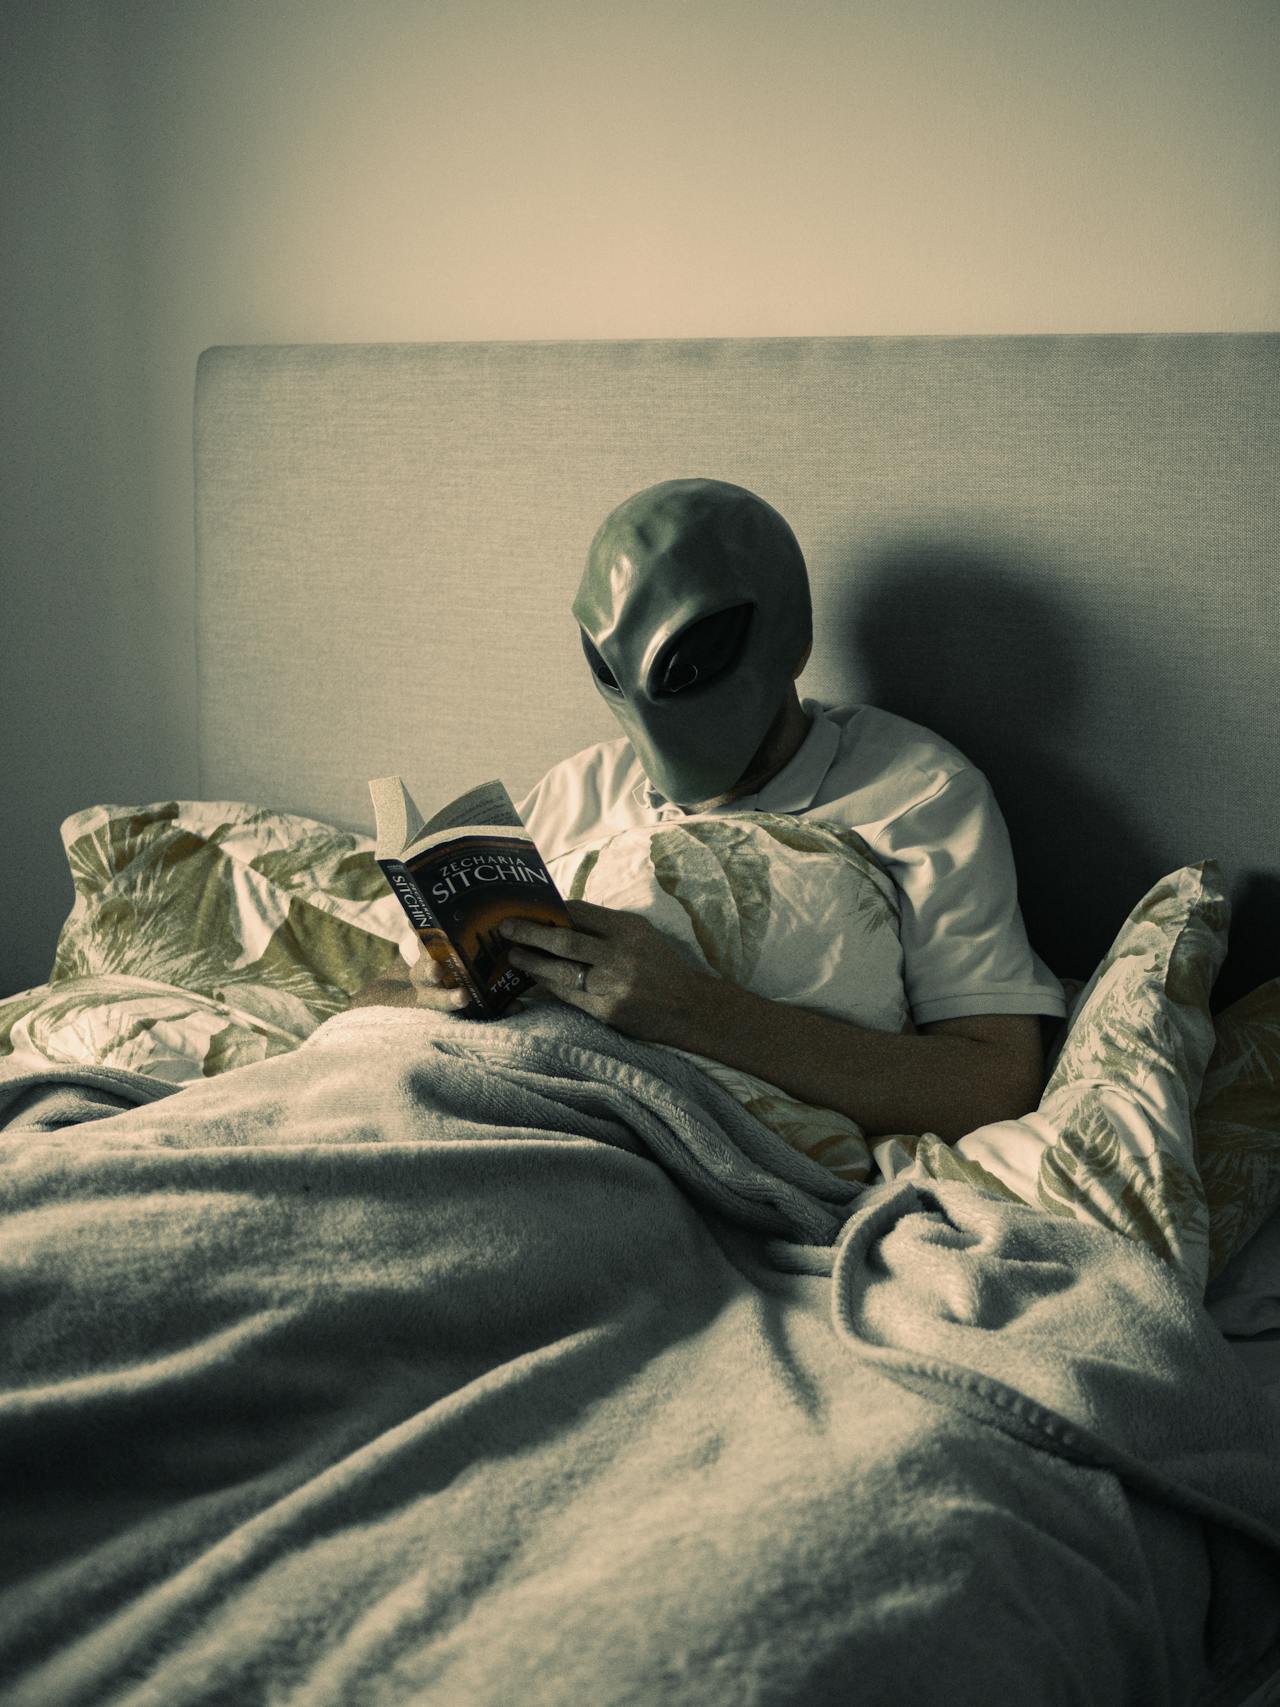 Person in Alien Mask Sitting in Bed and Reading Book 